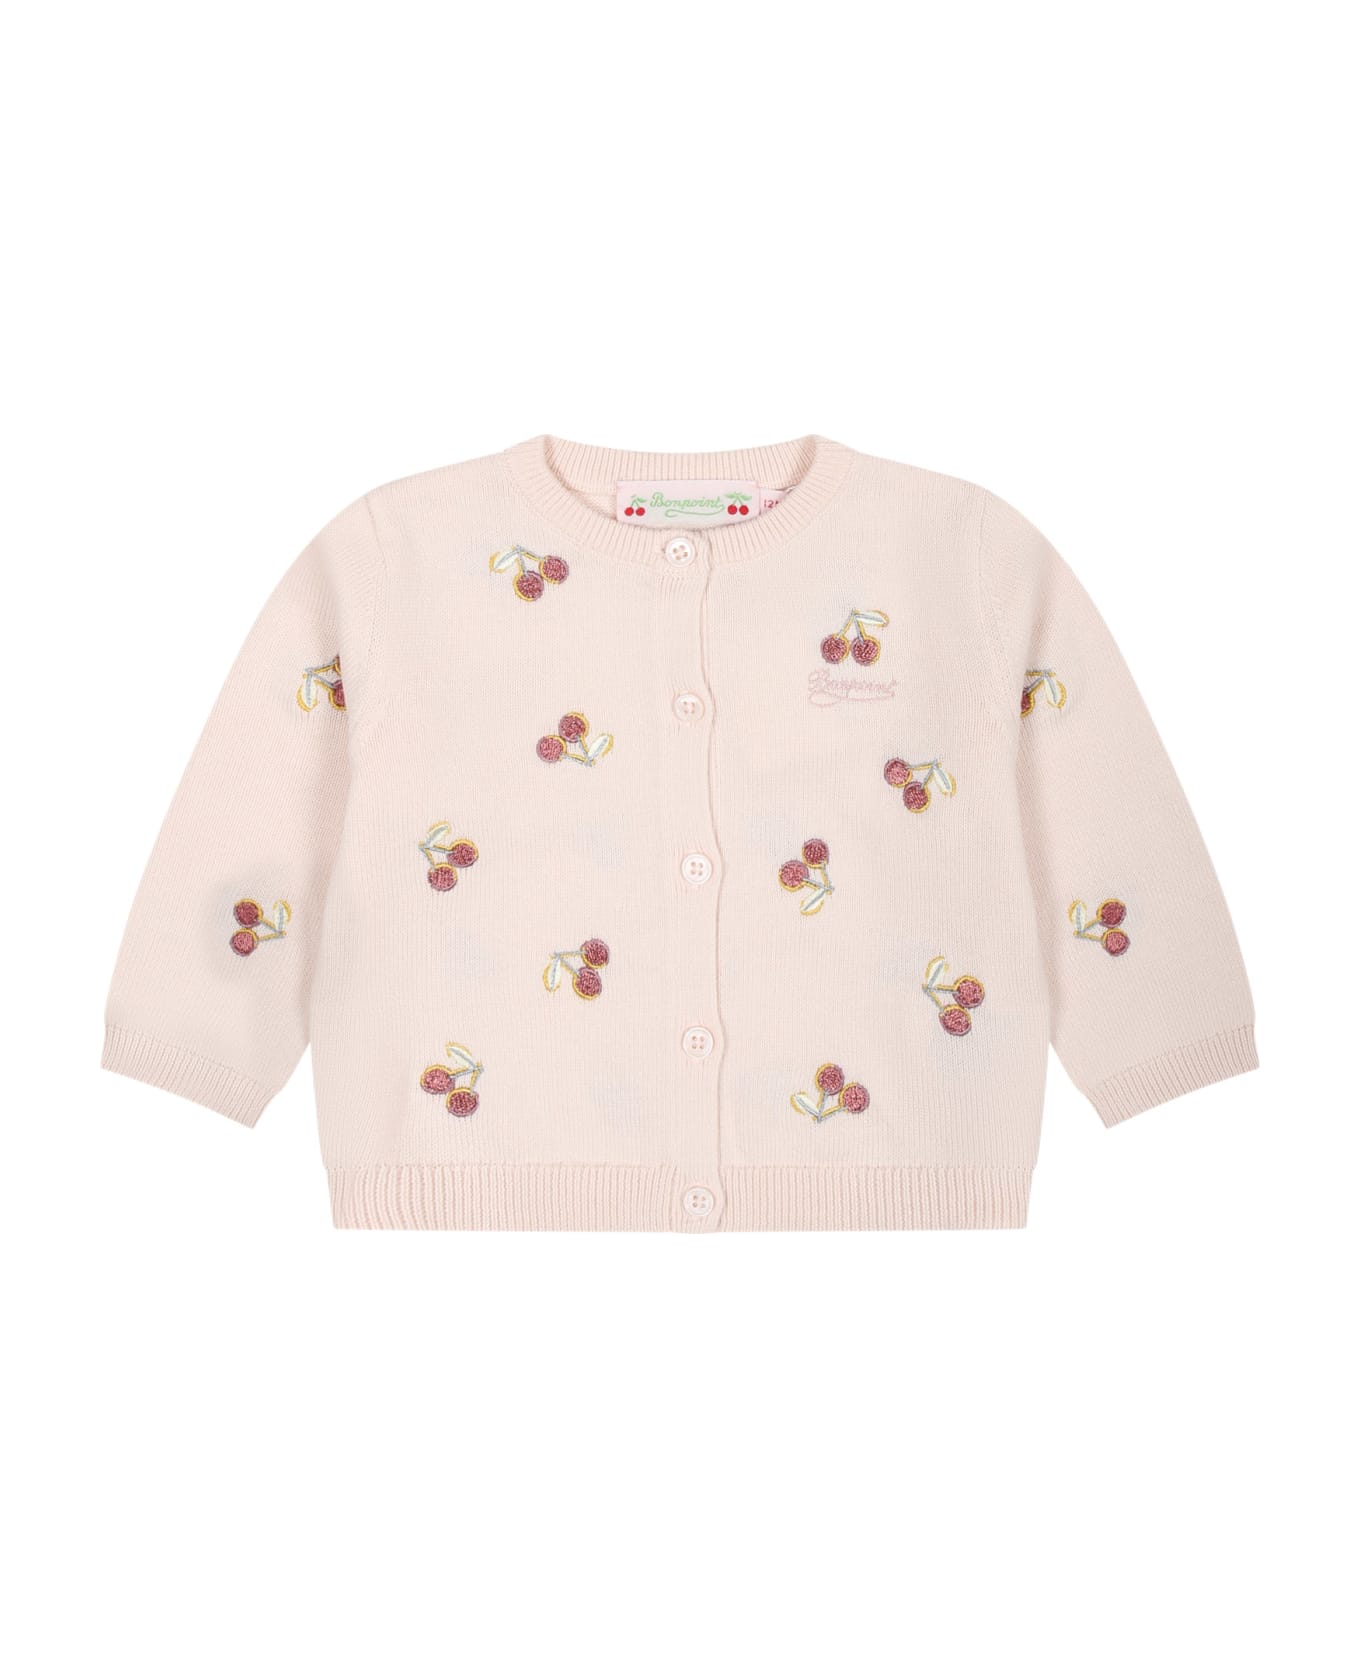 Bonpoint Pink Cardigan For Baby Girl With Cherries - Upb Rose